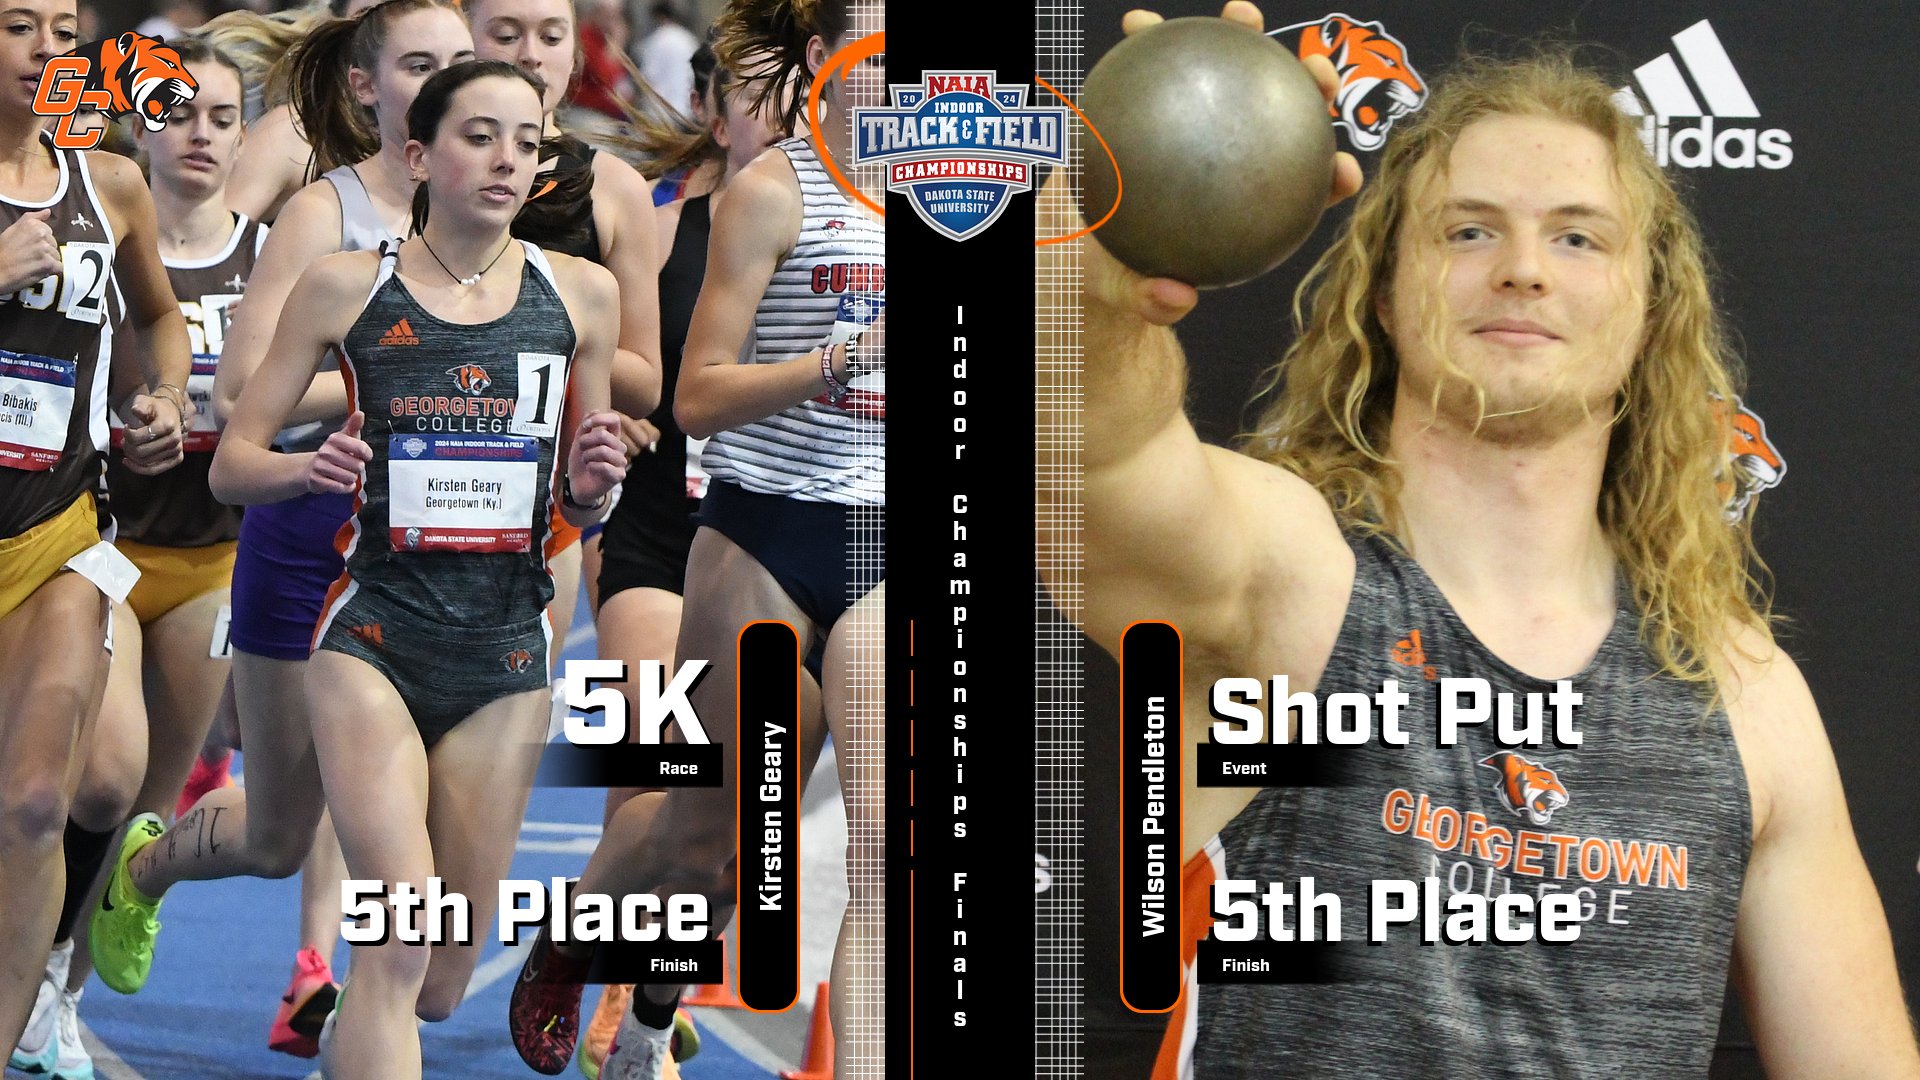 Geary, Pendleton bring home Top-5 finishes at Nationals